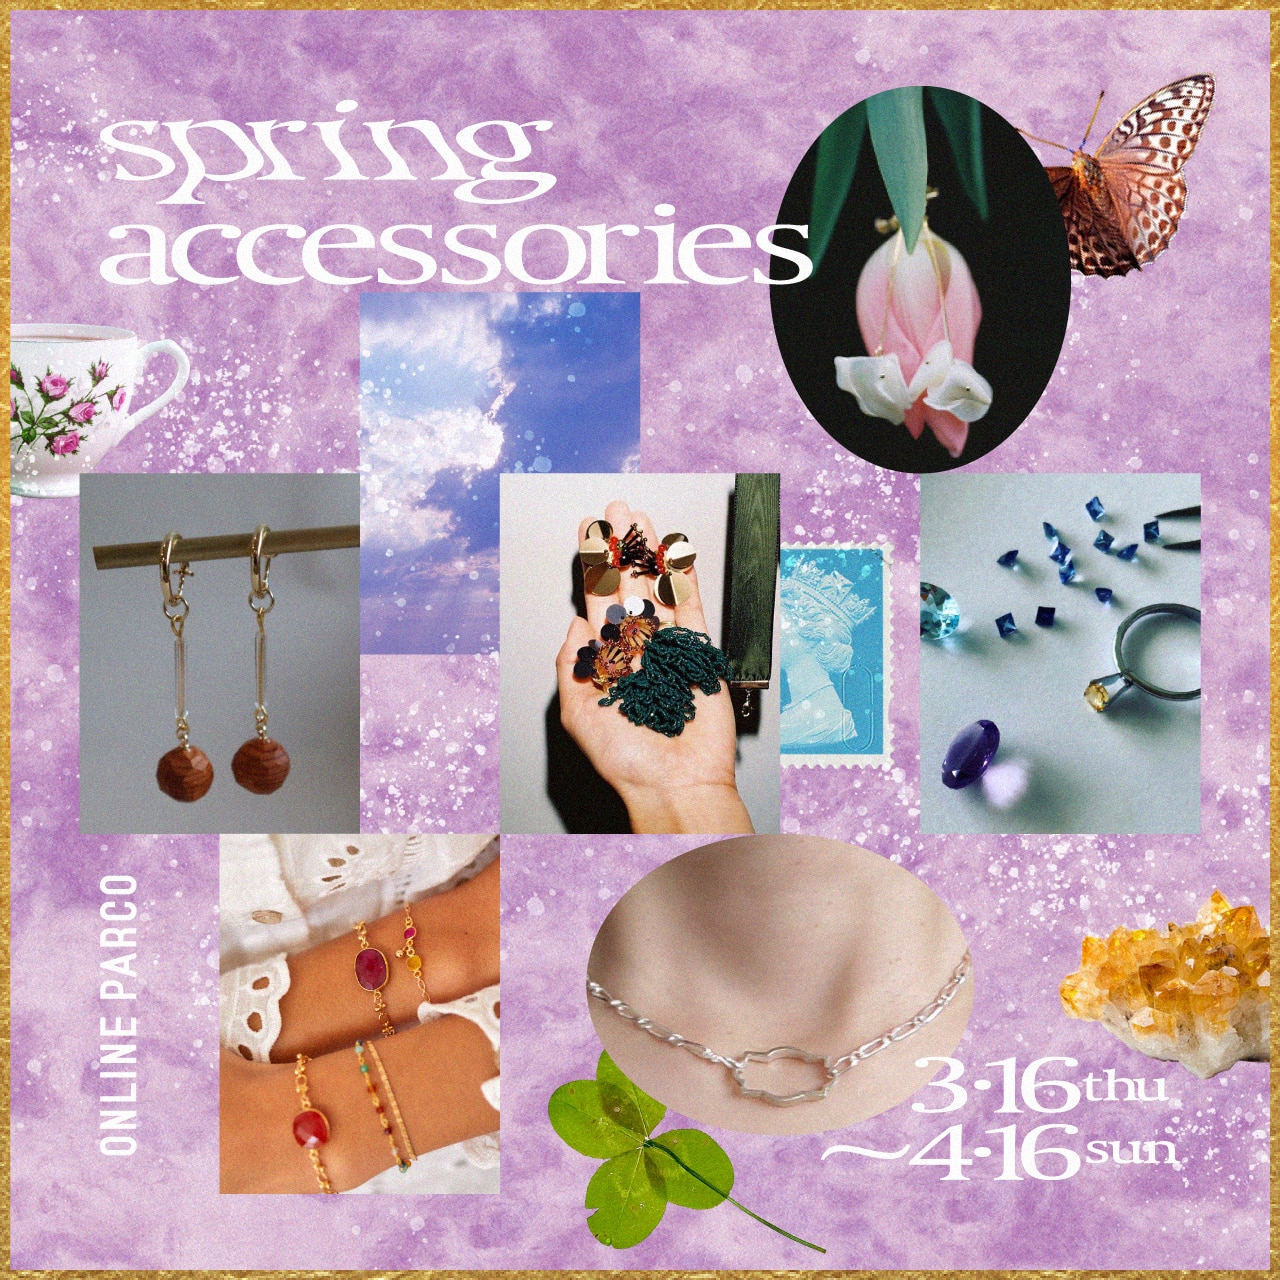 PARCO SPRING ACCESSORIES